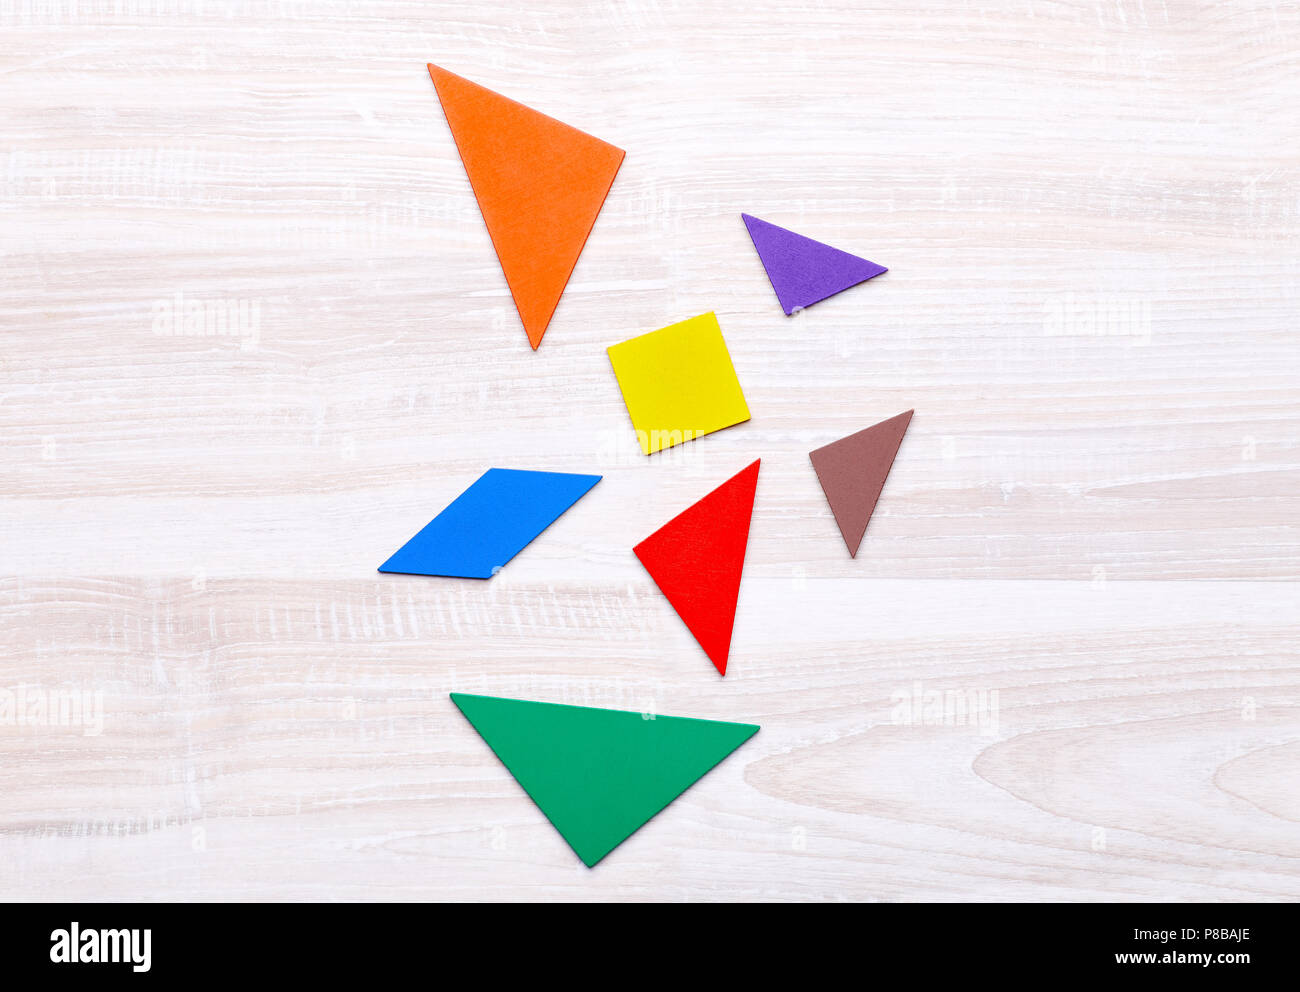 Colored geometric pieces of puzzle like triangles, square and parallelogram, are scattered on a light wooden background Stock Photo